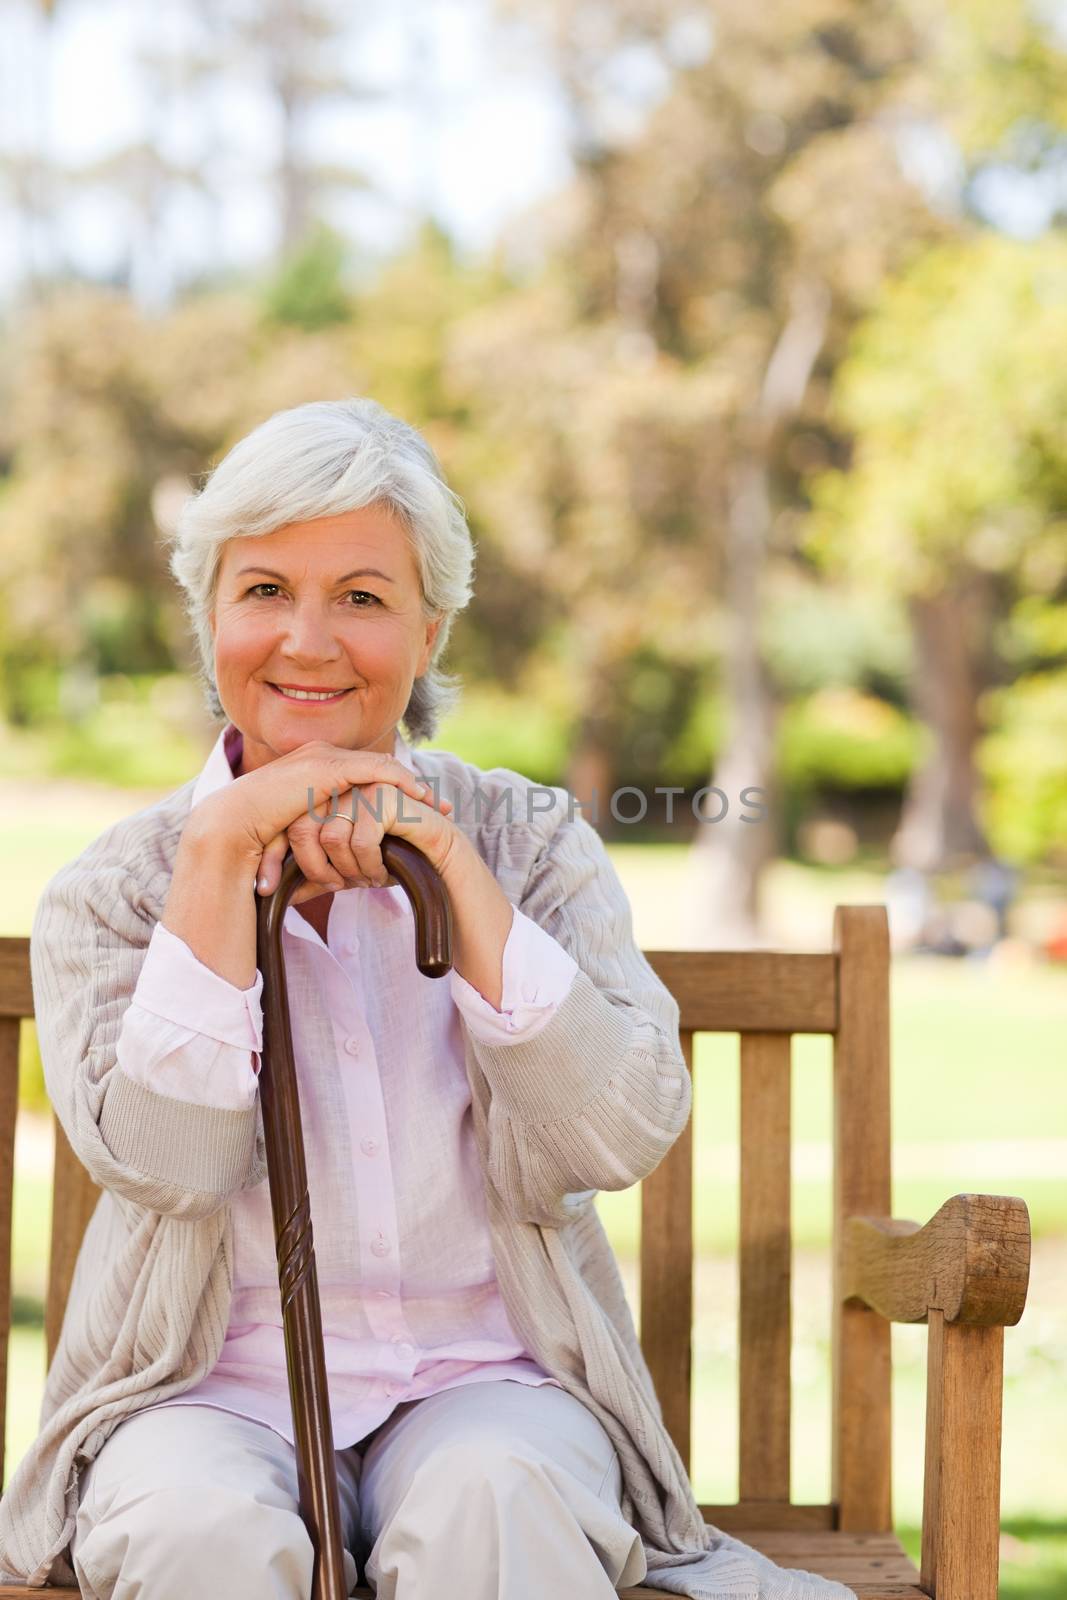 Woman with her walking stick in the park by Wavebreakmedia